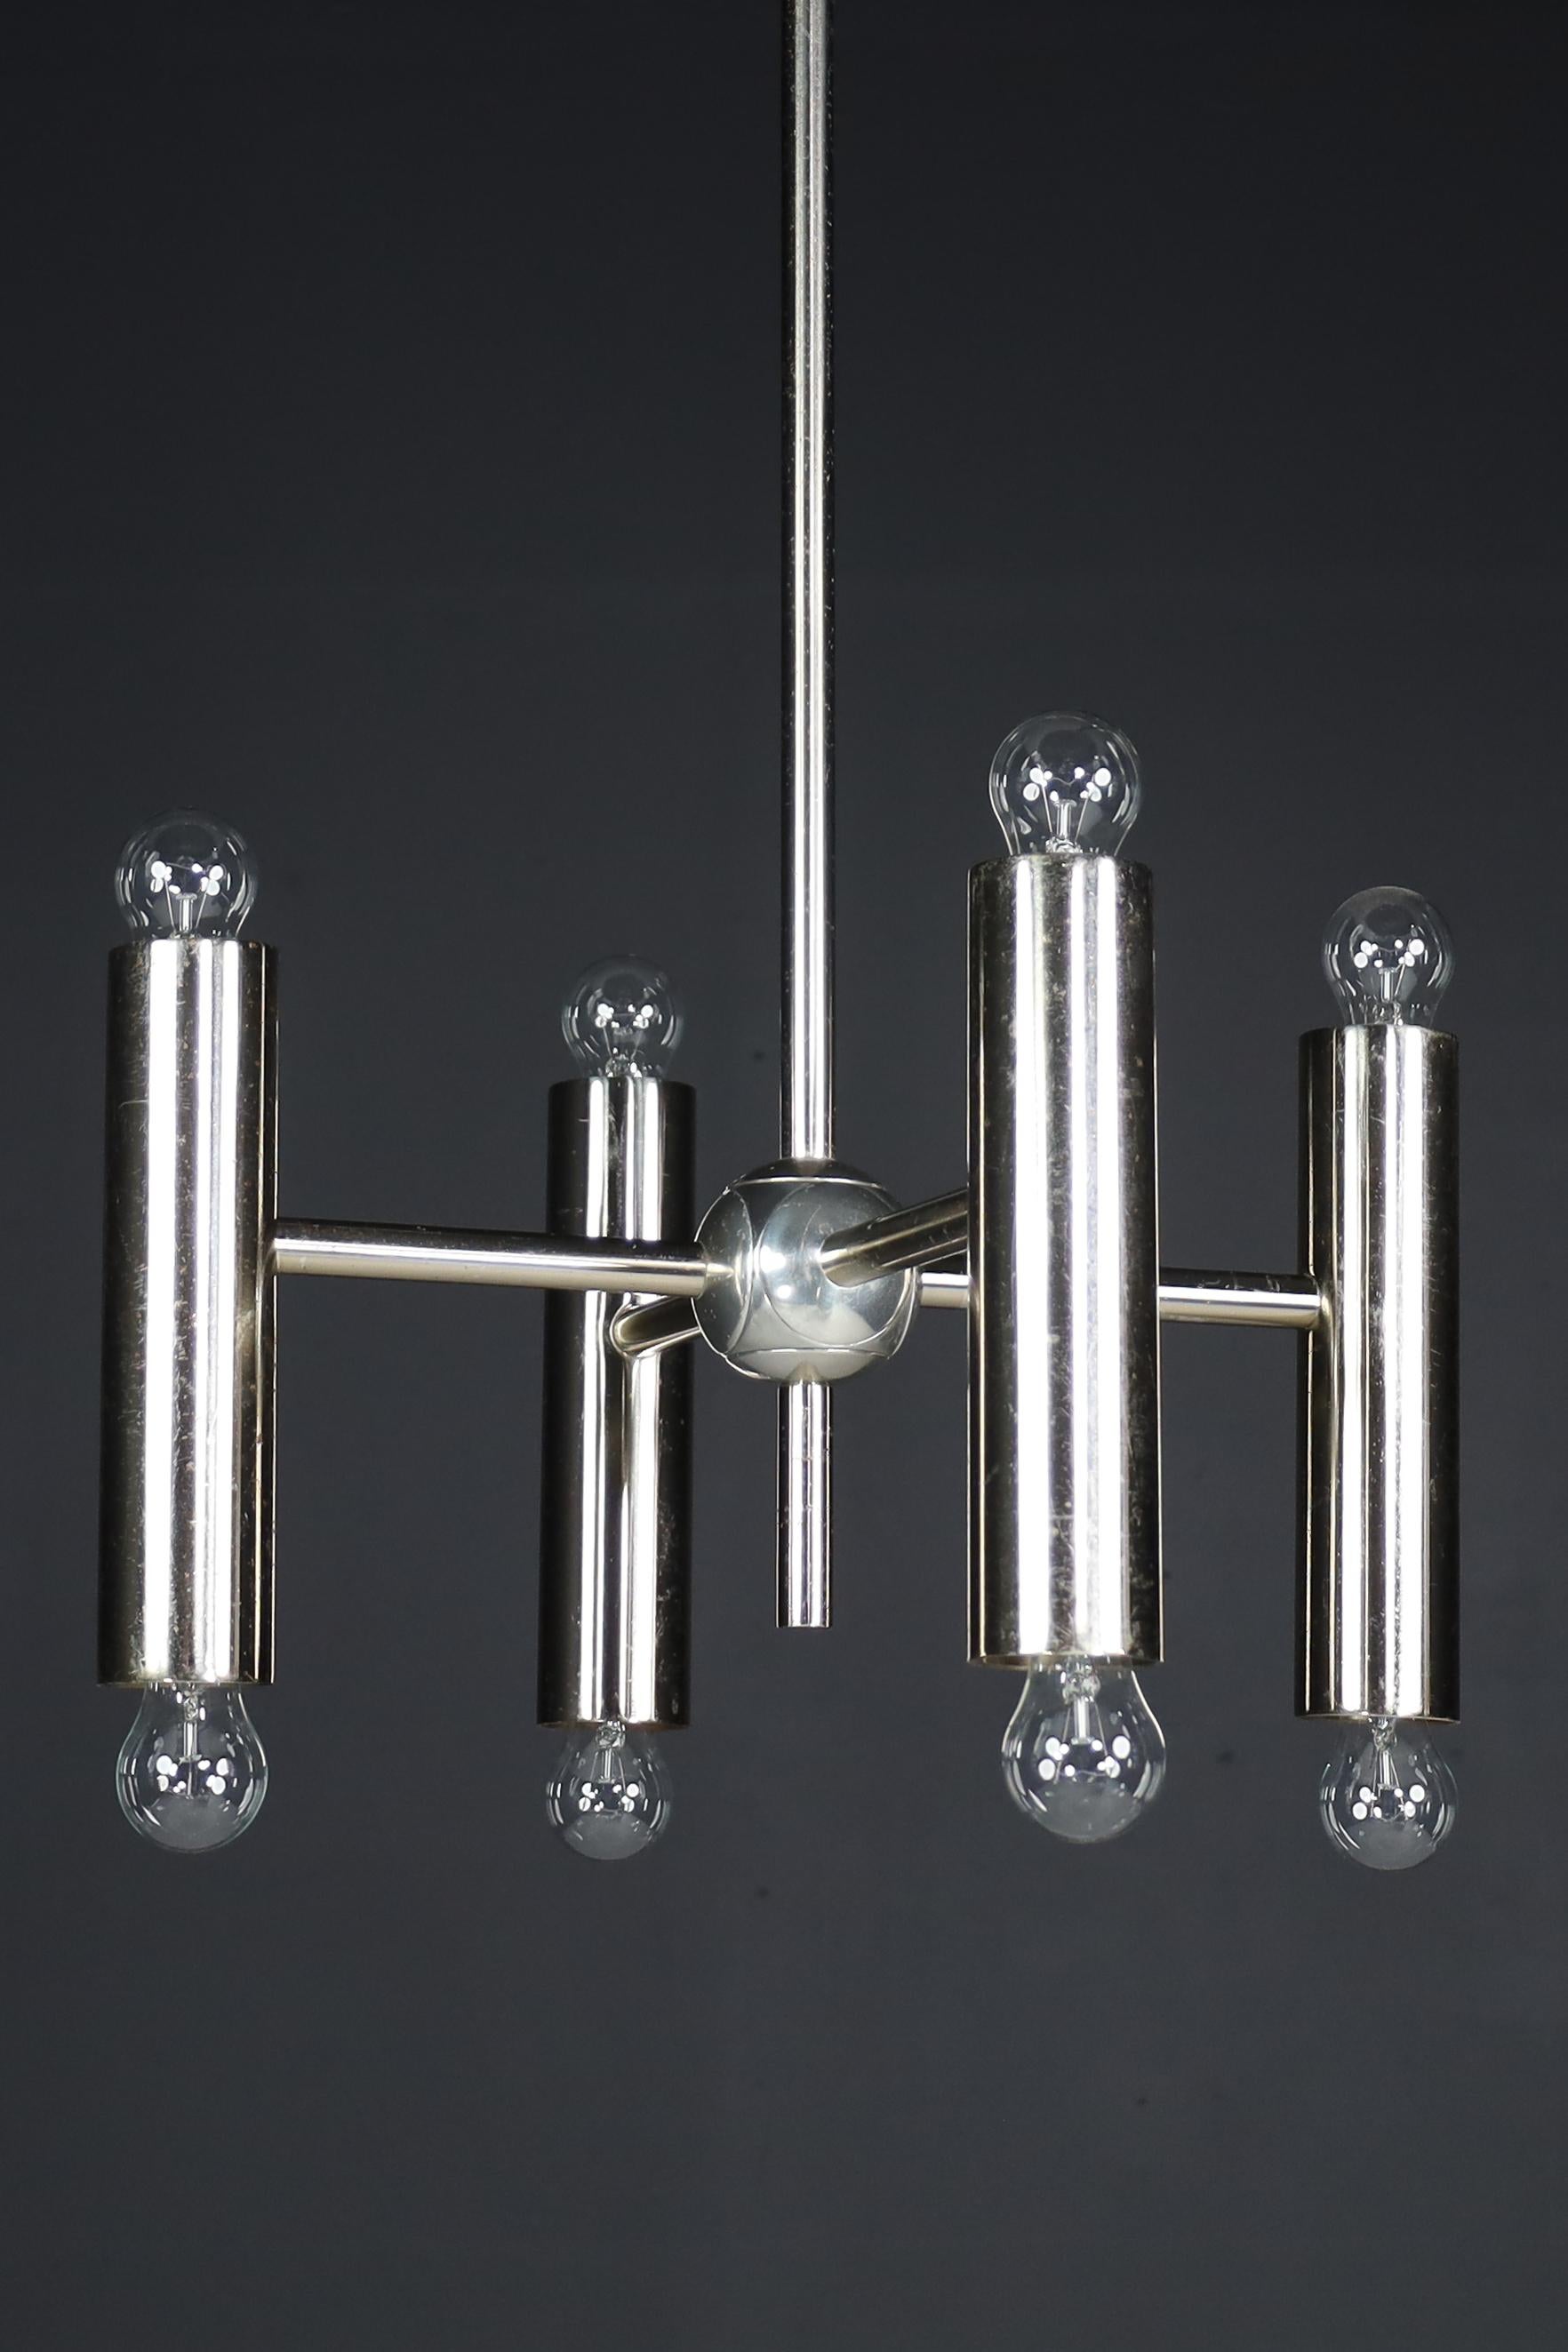 1 of 6 Minimalistic Design Geometric Chandeliers in Chrome, Germany, 1970s For Sale 9